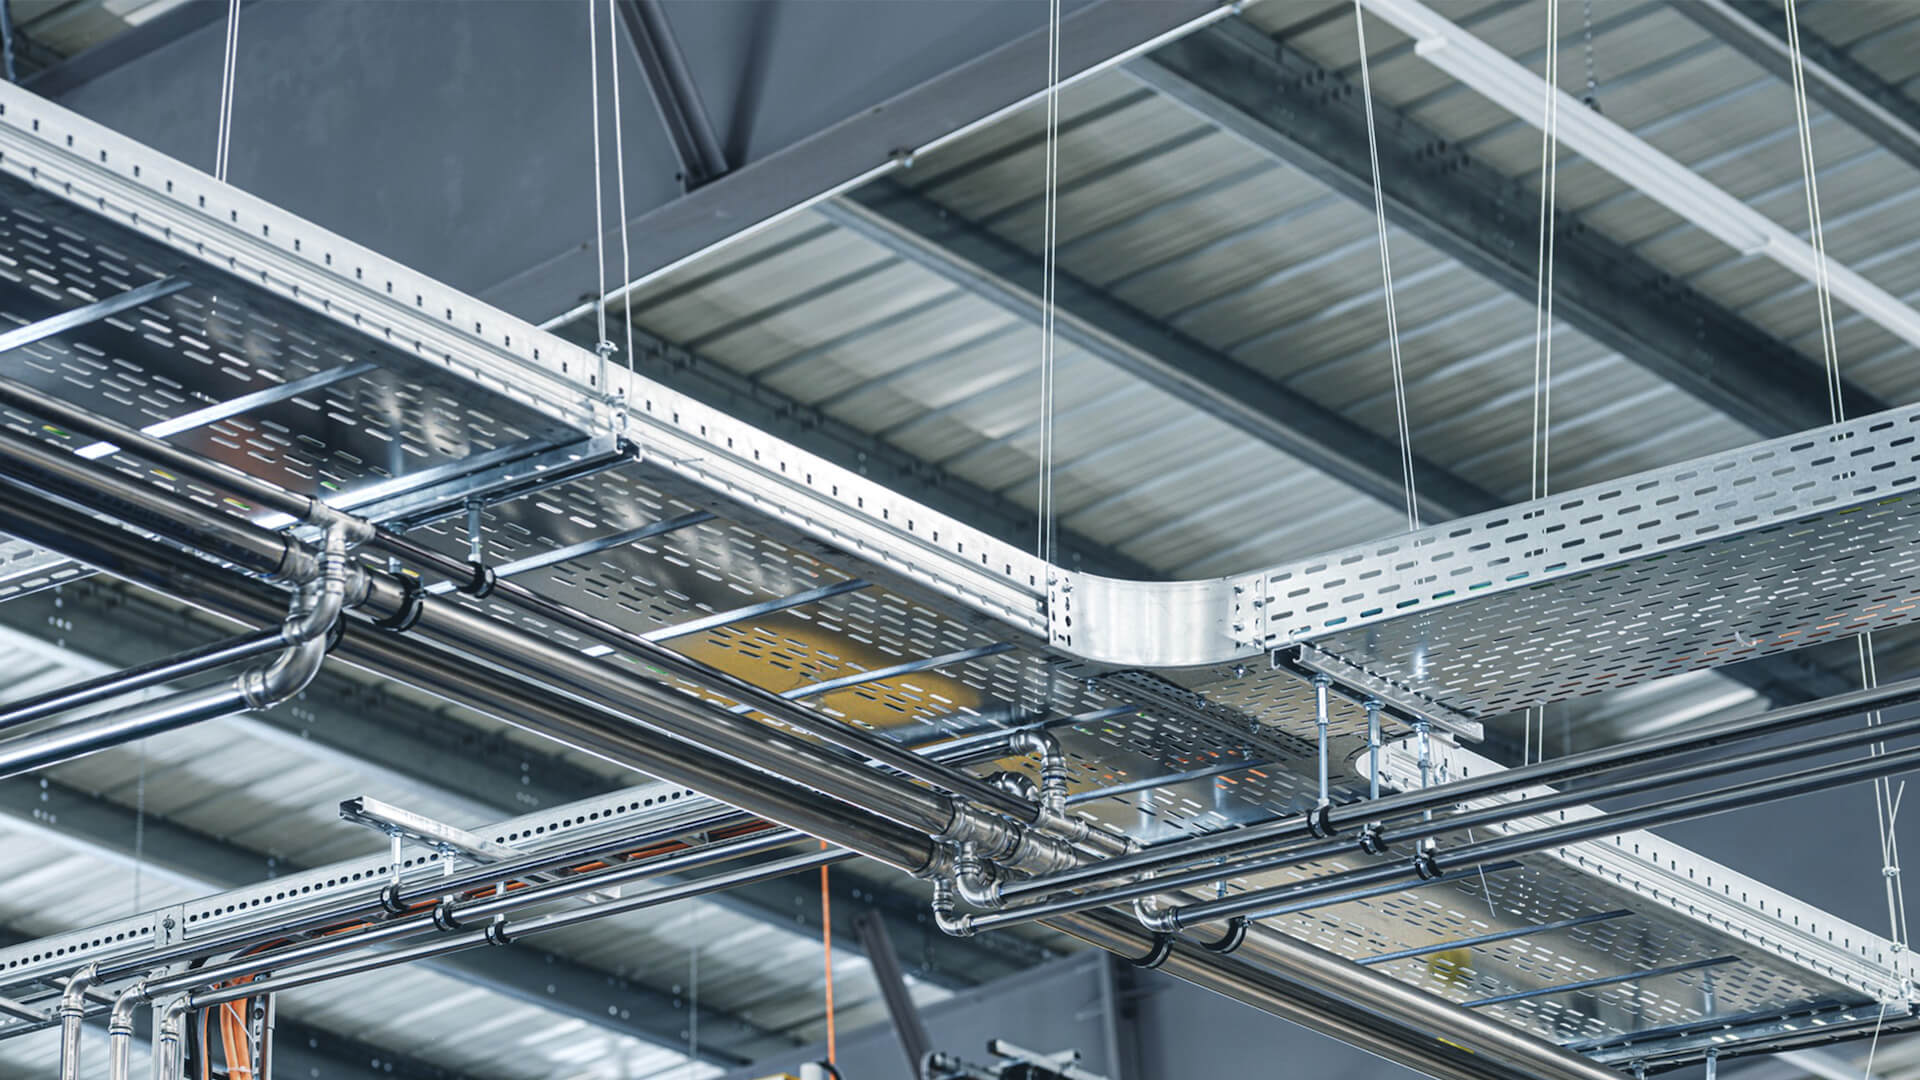 Cable management, Cable tray, Cable ladder rack